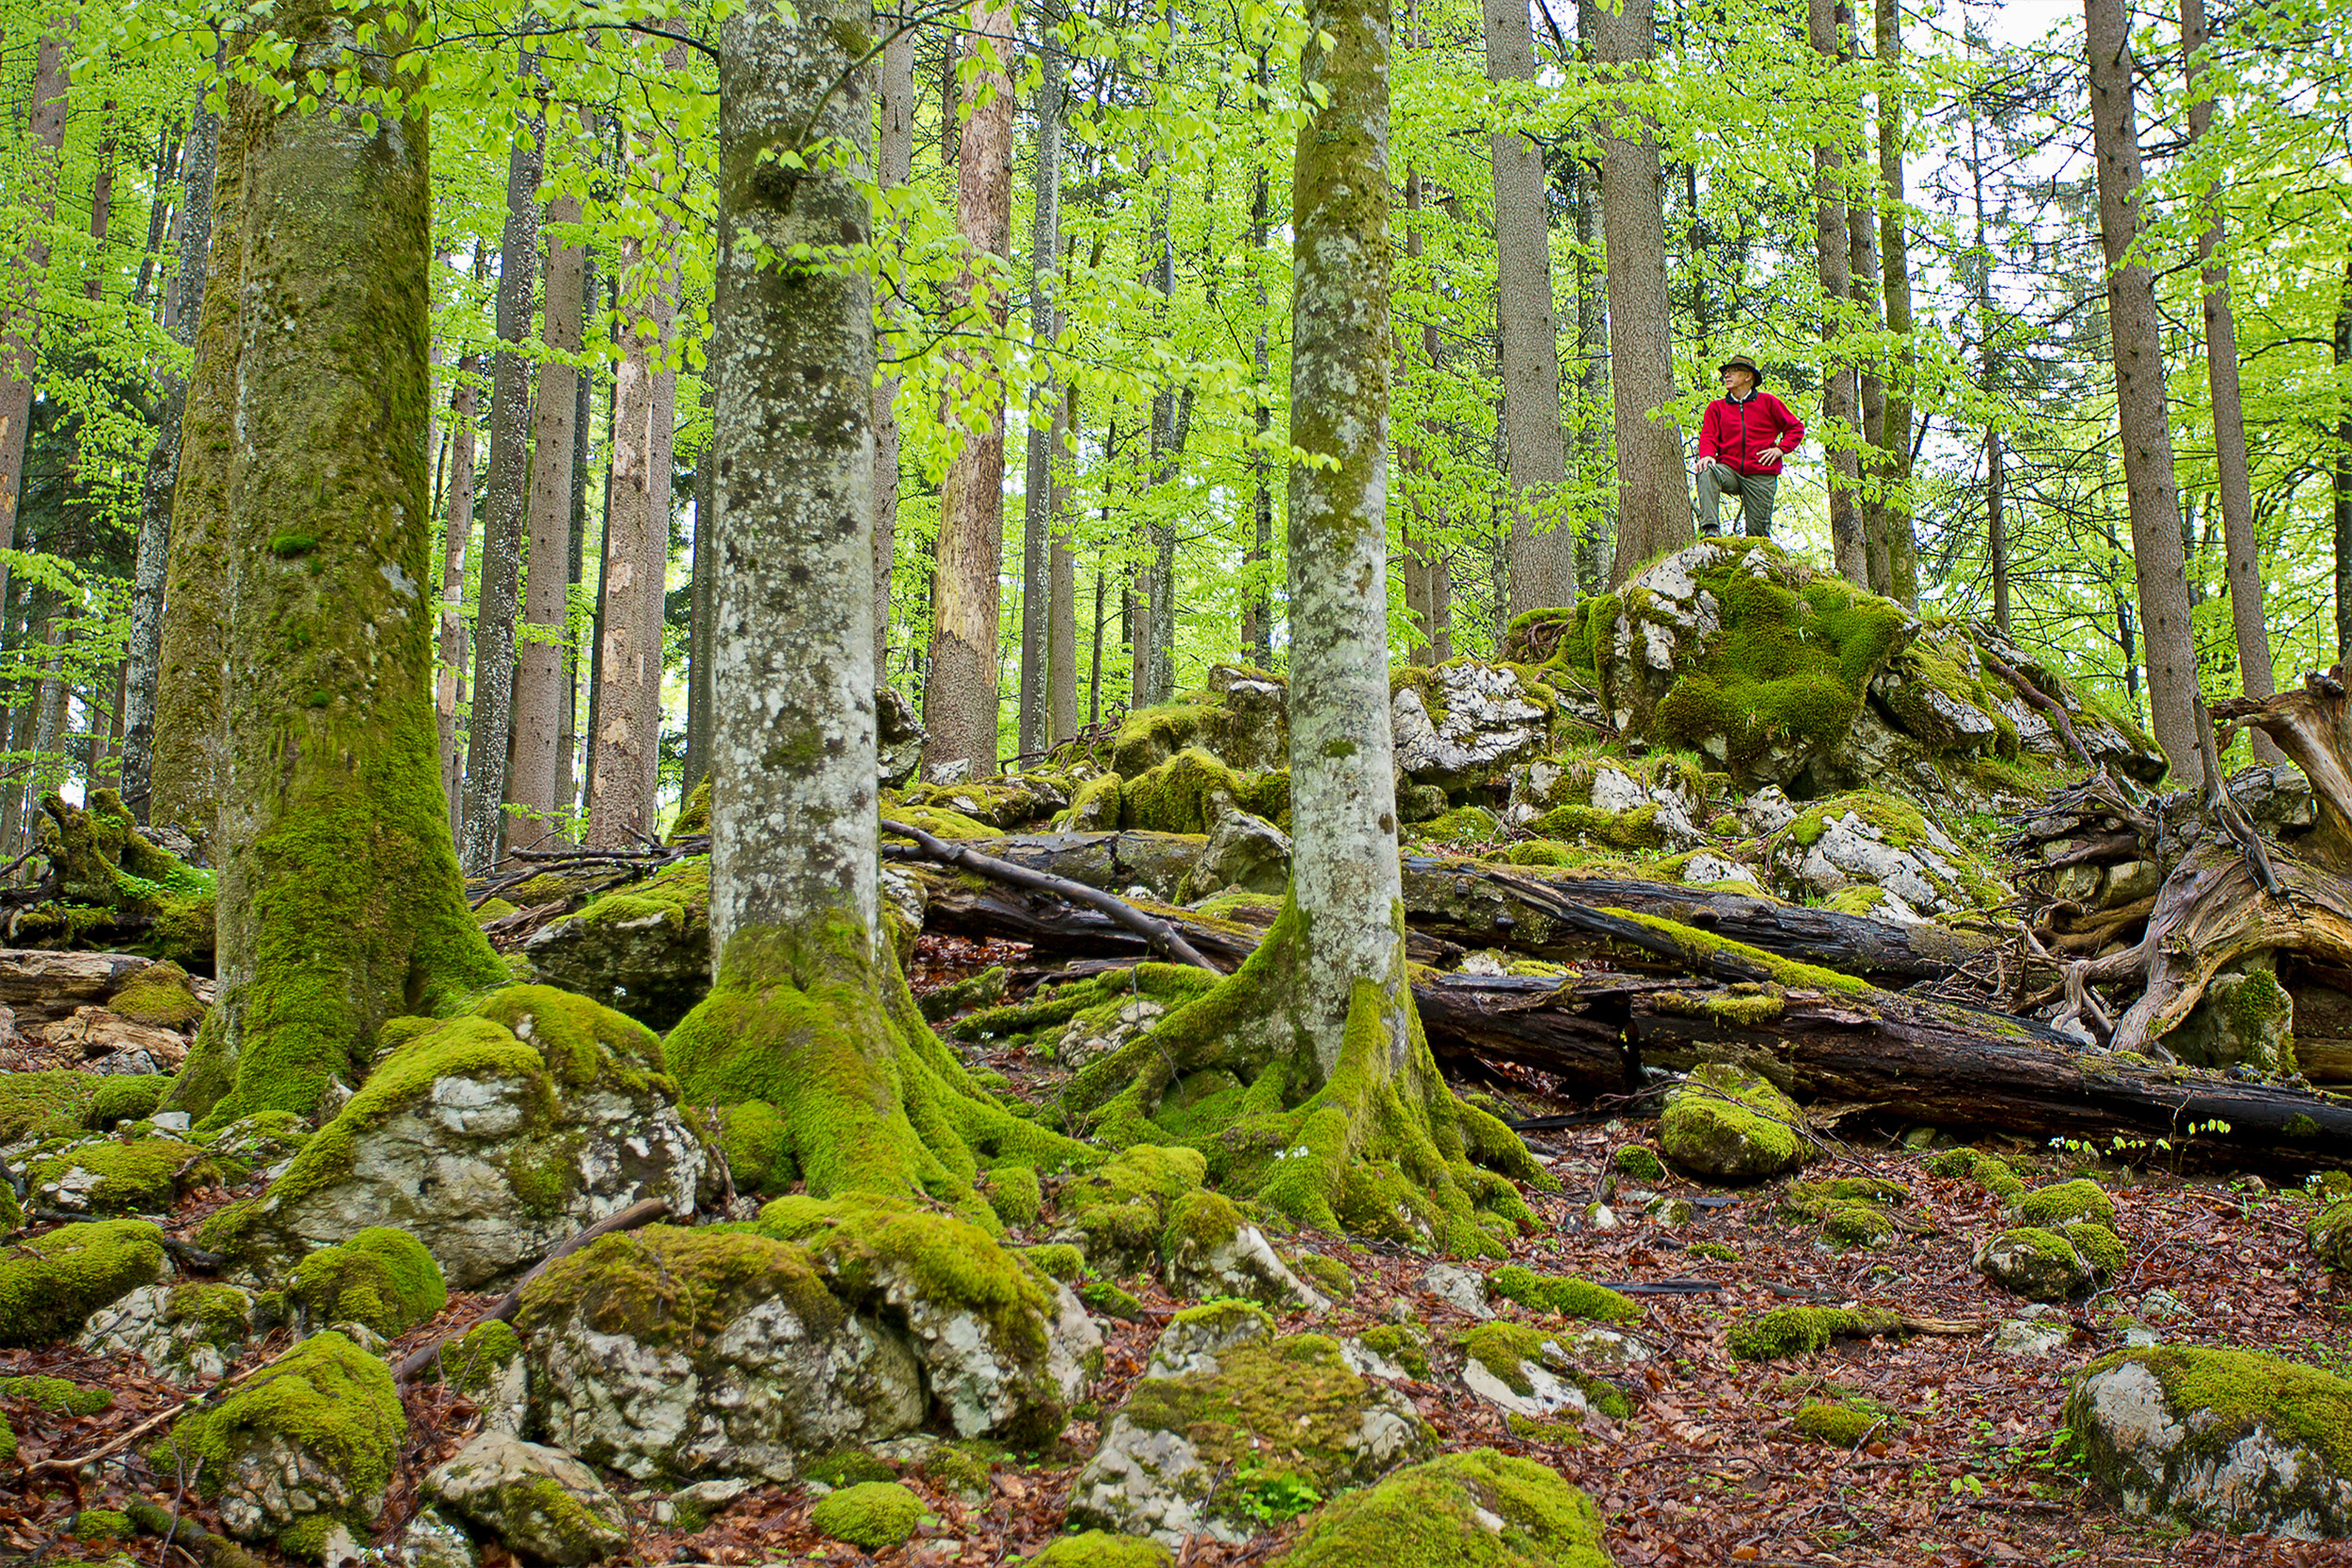 A hiker stands on a rock in the beech forest and looks at the fresh beech leaves